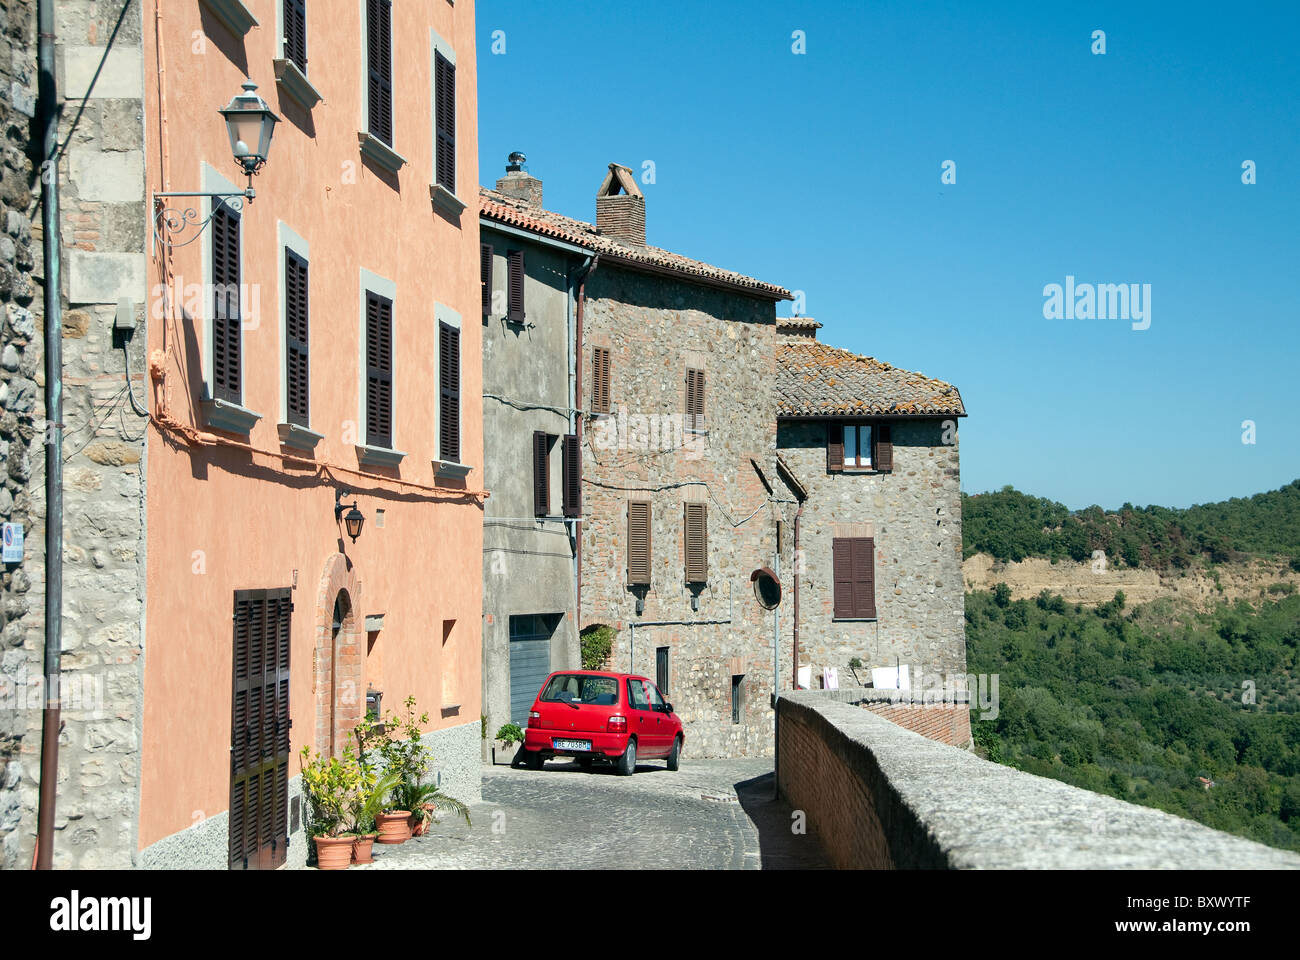 Red car parked in the Umbrian town of Ficulle, Italy Stock Photo